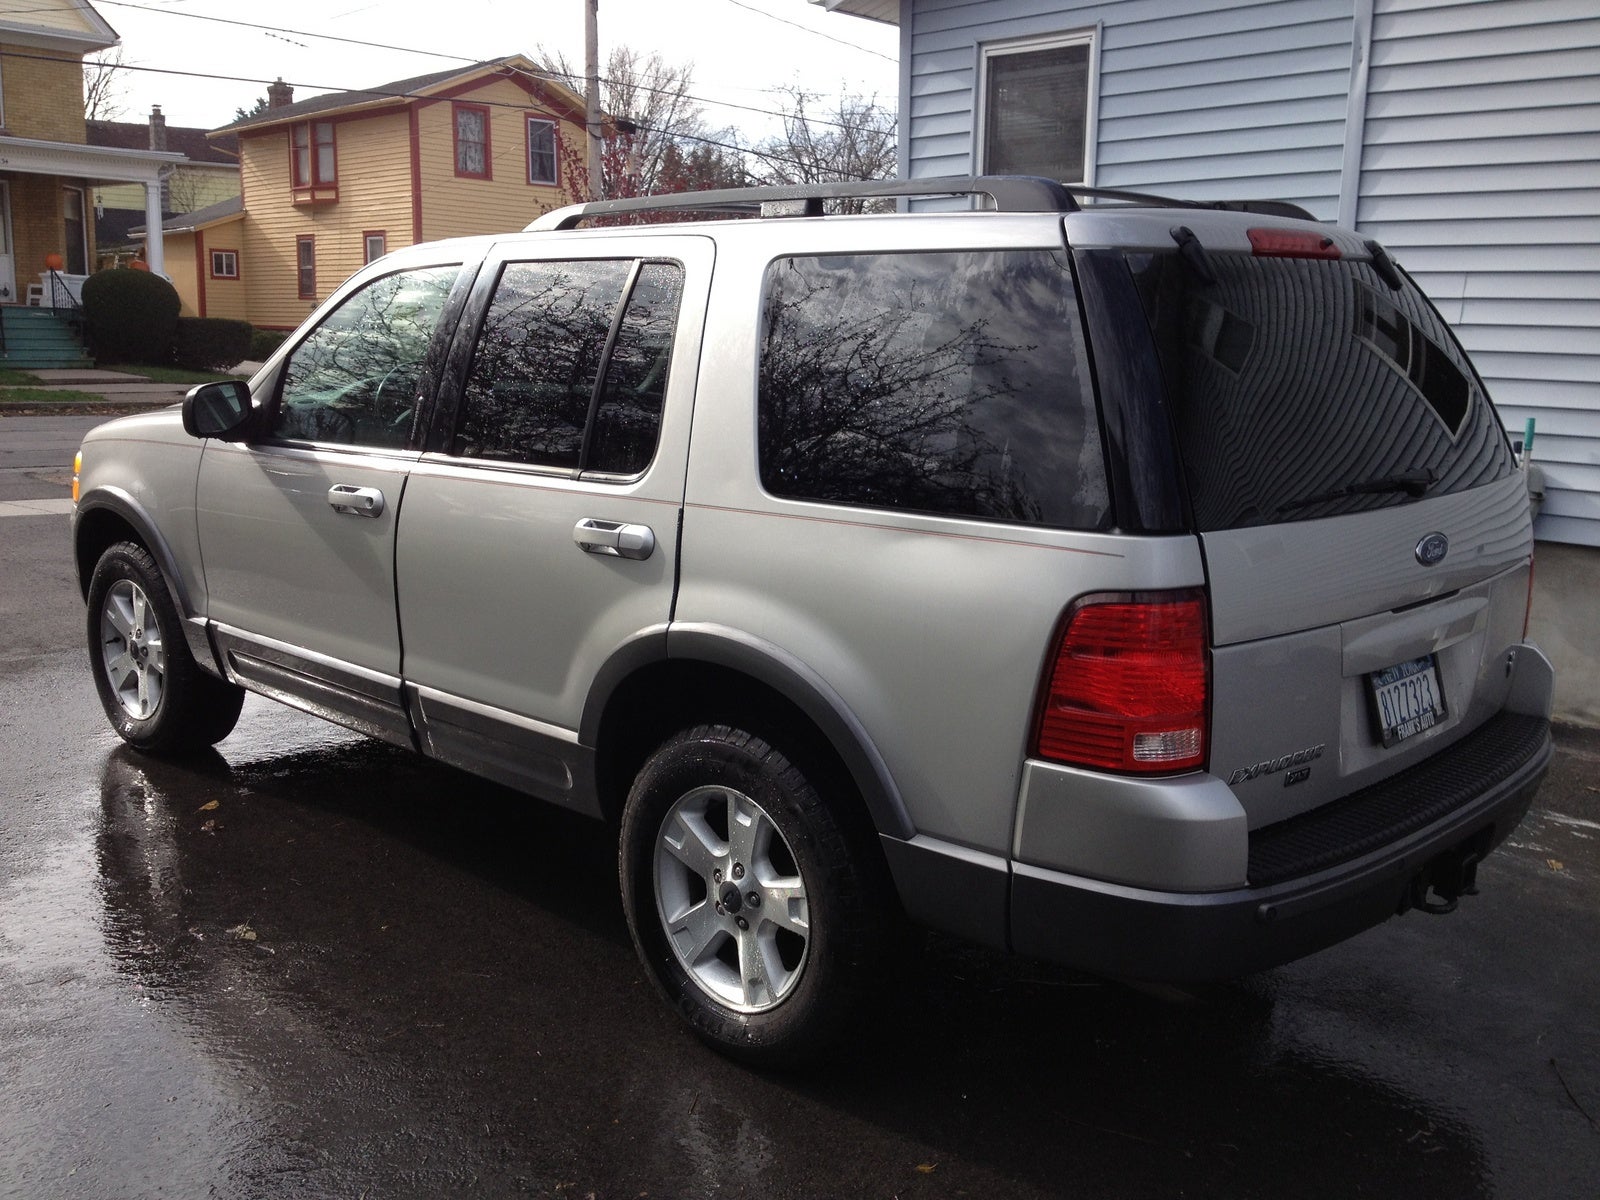 2004 Ford explorer xlt v8 towing capacity 2004 Ford Explorer Xlt Towing Capacity